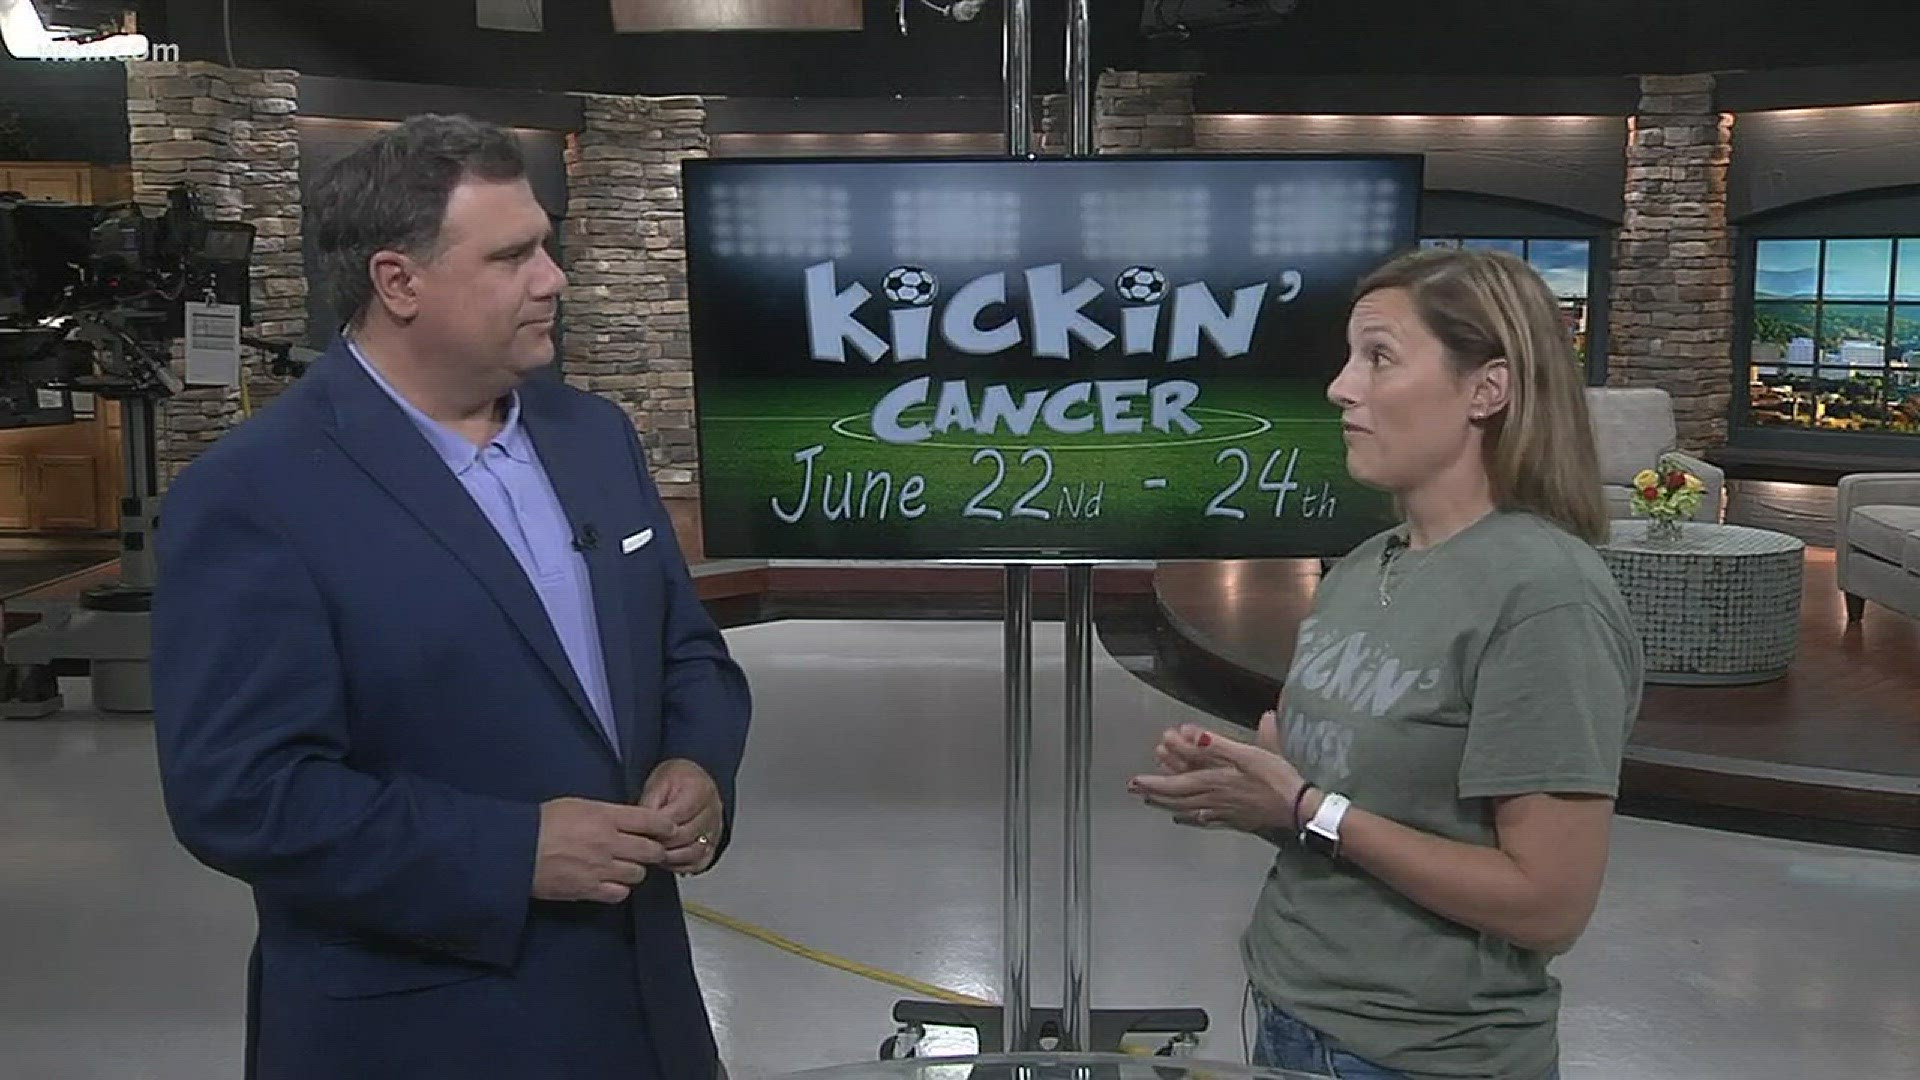 The Knoxville Kickin Cancer Adult Soccer Tournament June 22nd through the 24thCool SportsFundraiser for 2 local soccer players. They are currently looking for teams. Follow them on Facebook or visit   knoxkickincancer.comMay 29, 2018-4pm